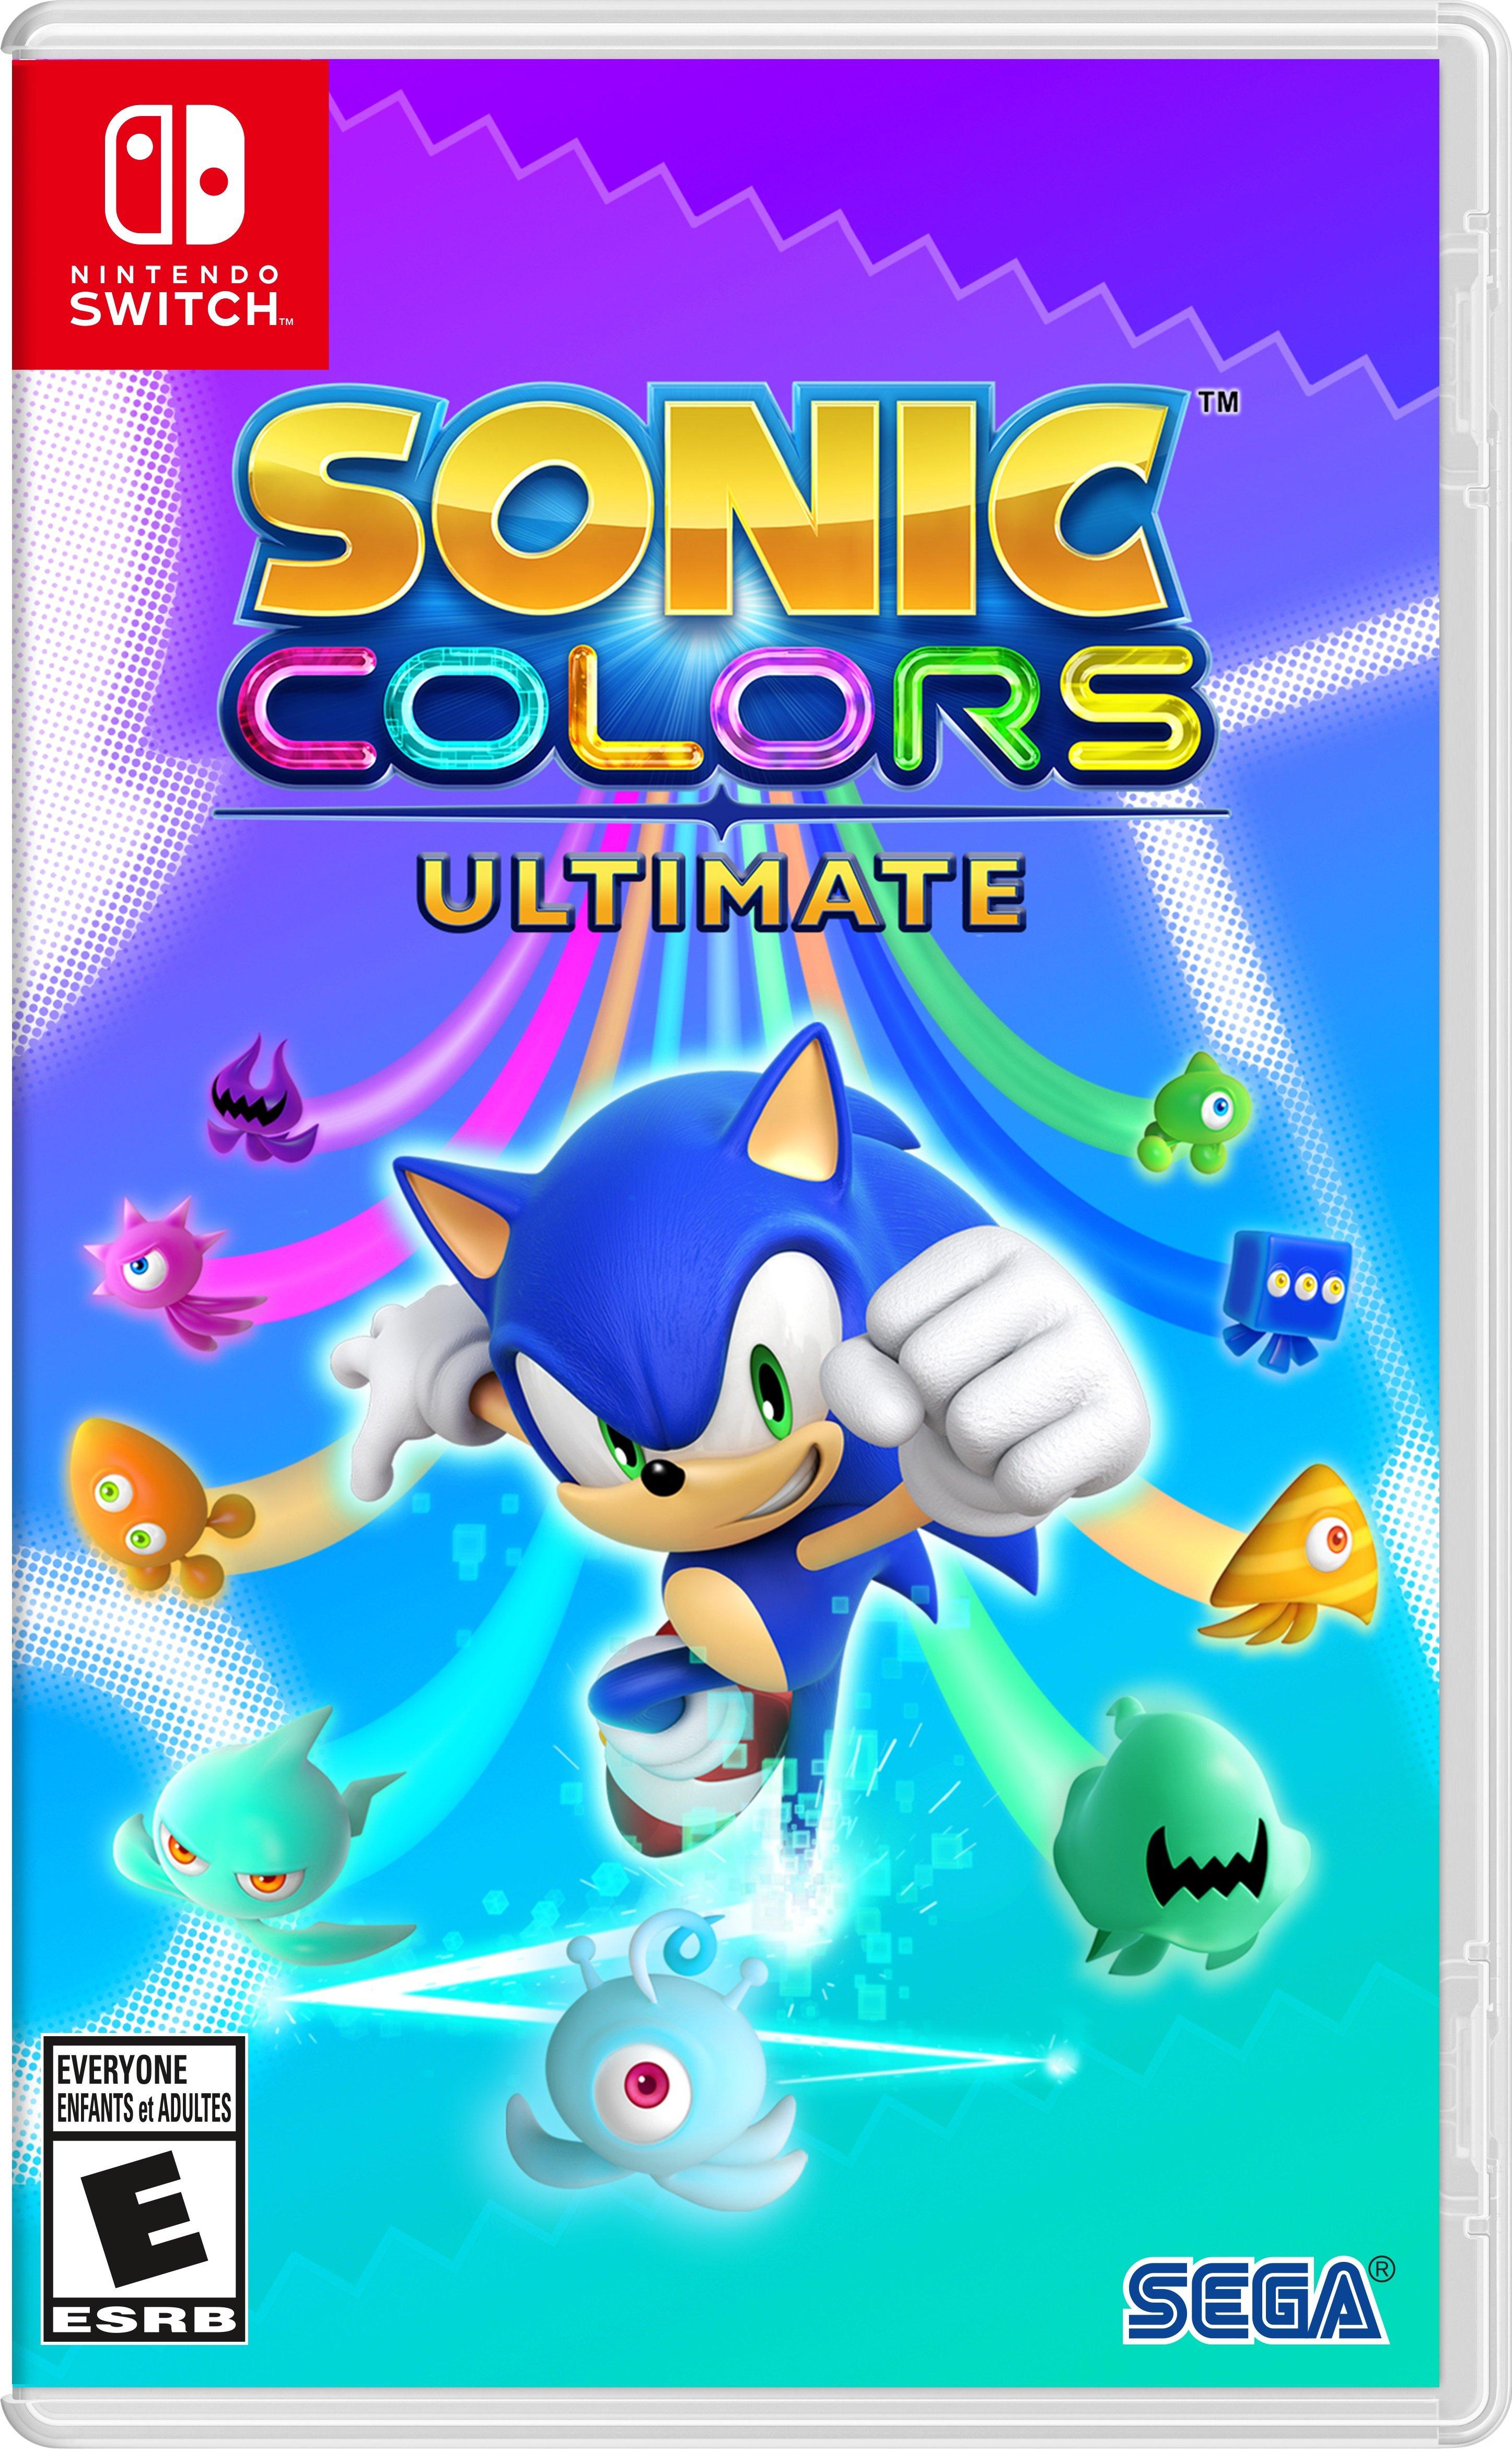 Sonic Colors - Nintendo Ds (Used)